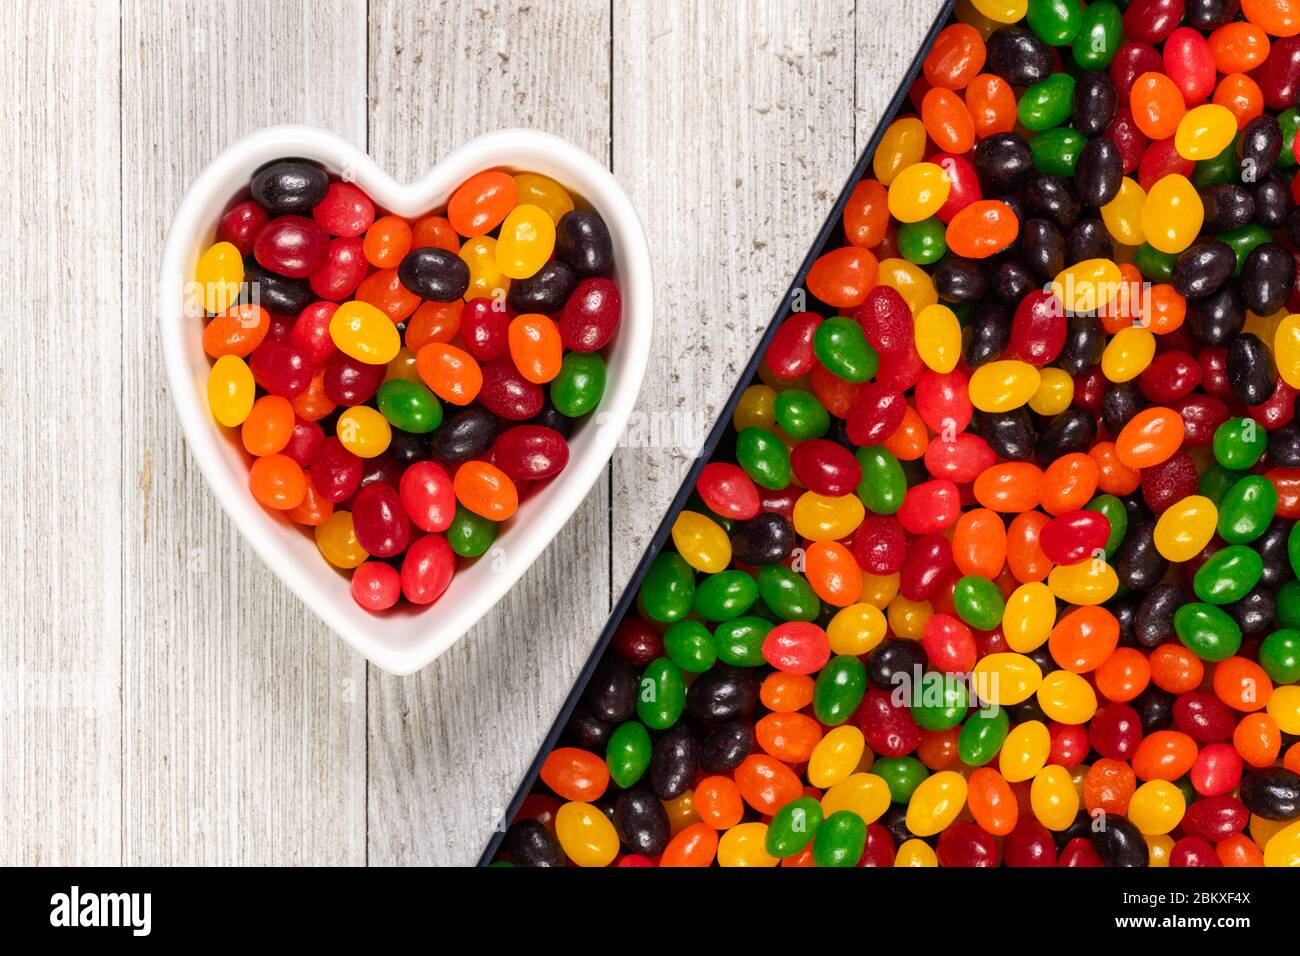 Assorted colorful black, red, green, yellow, and orange jelly beans, sweet candy background with a heart-shaped bowl. Kids' junk food. Stock Photo